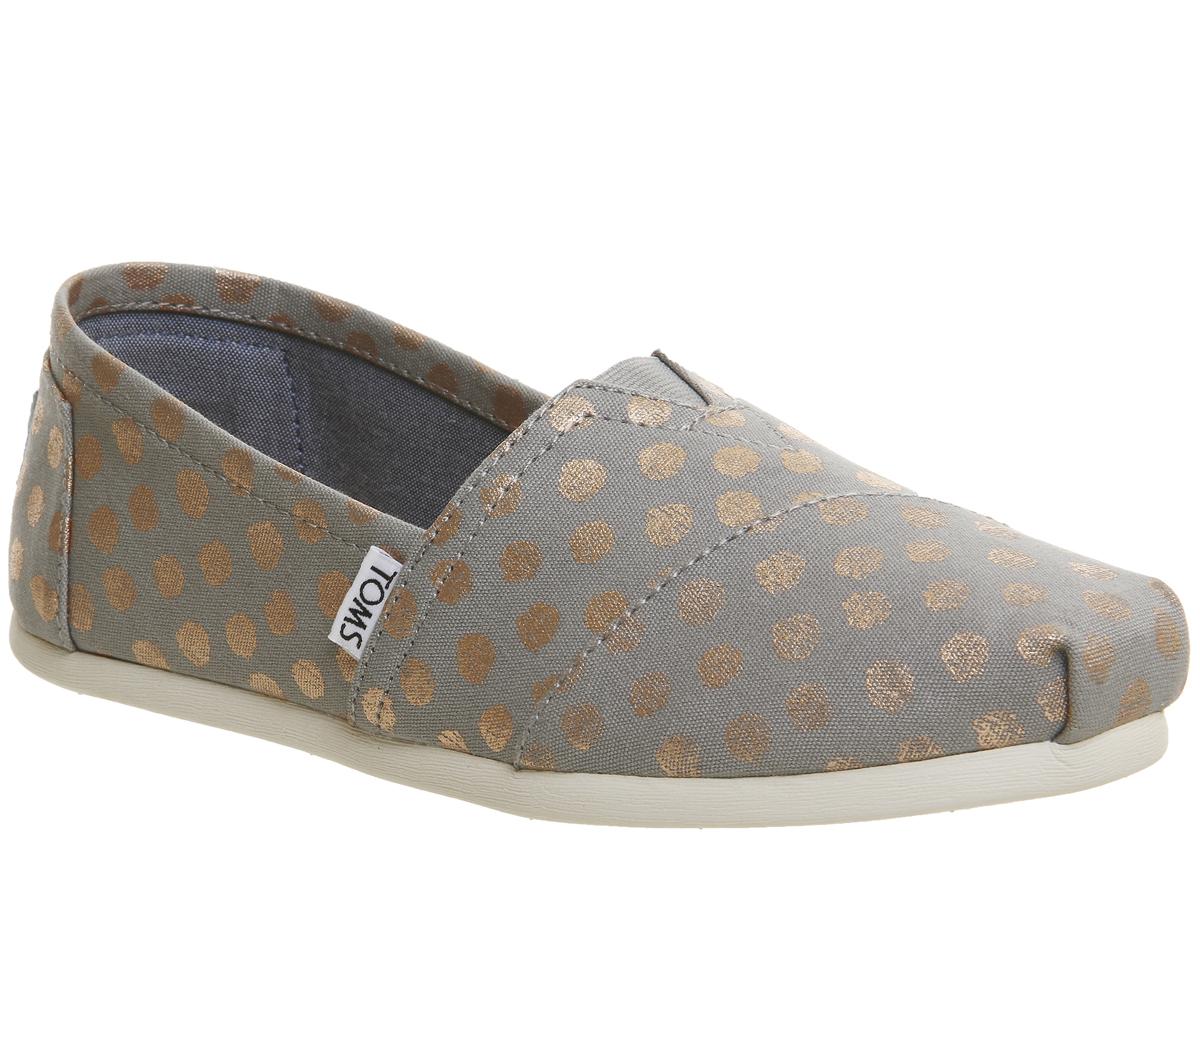 toms shoes rose gold